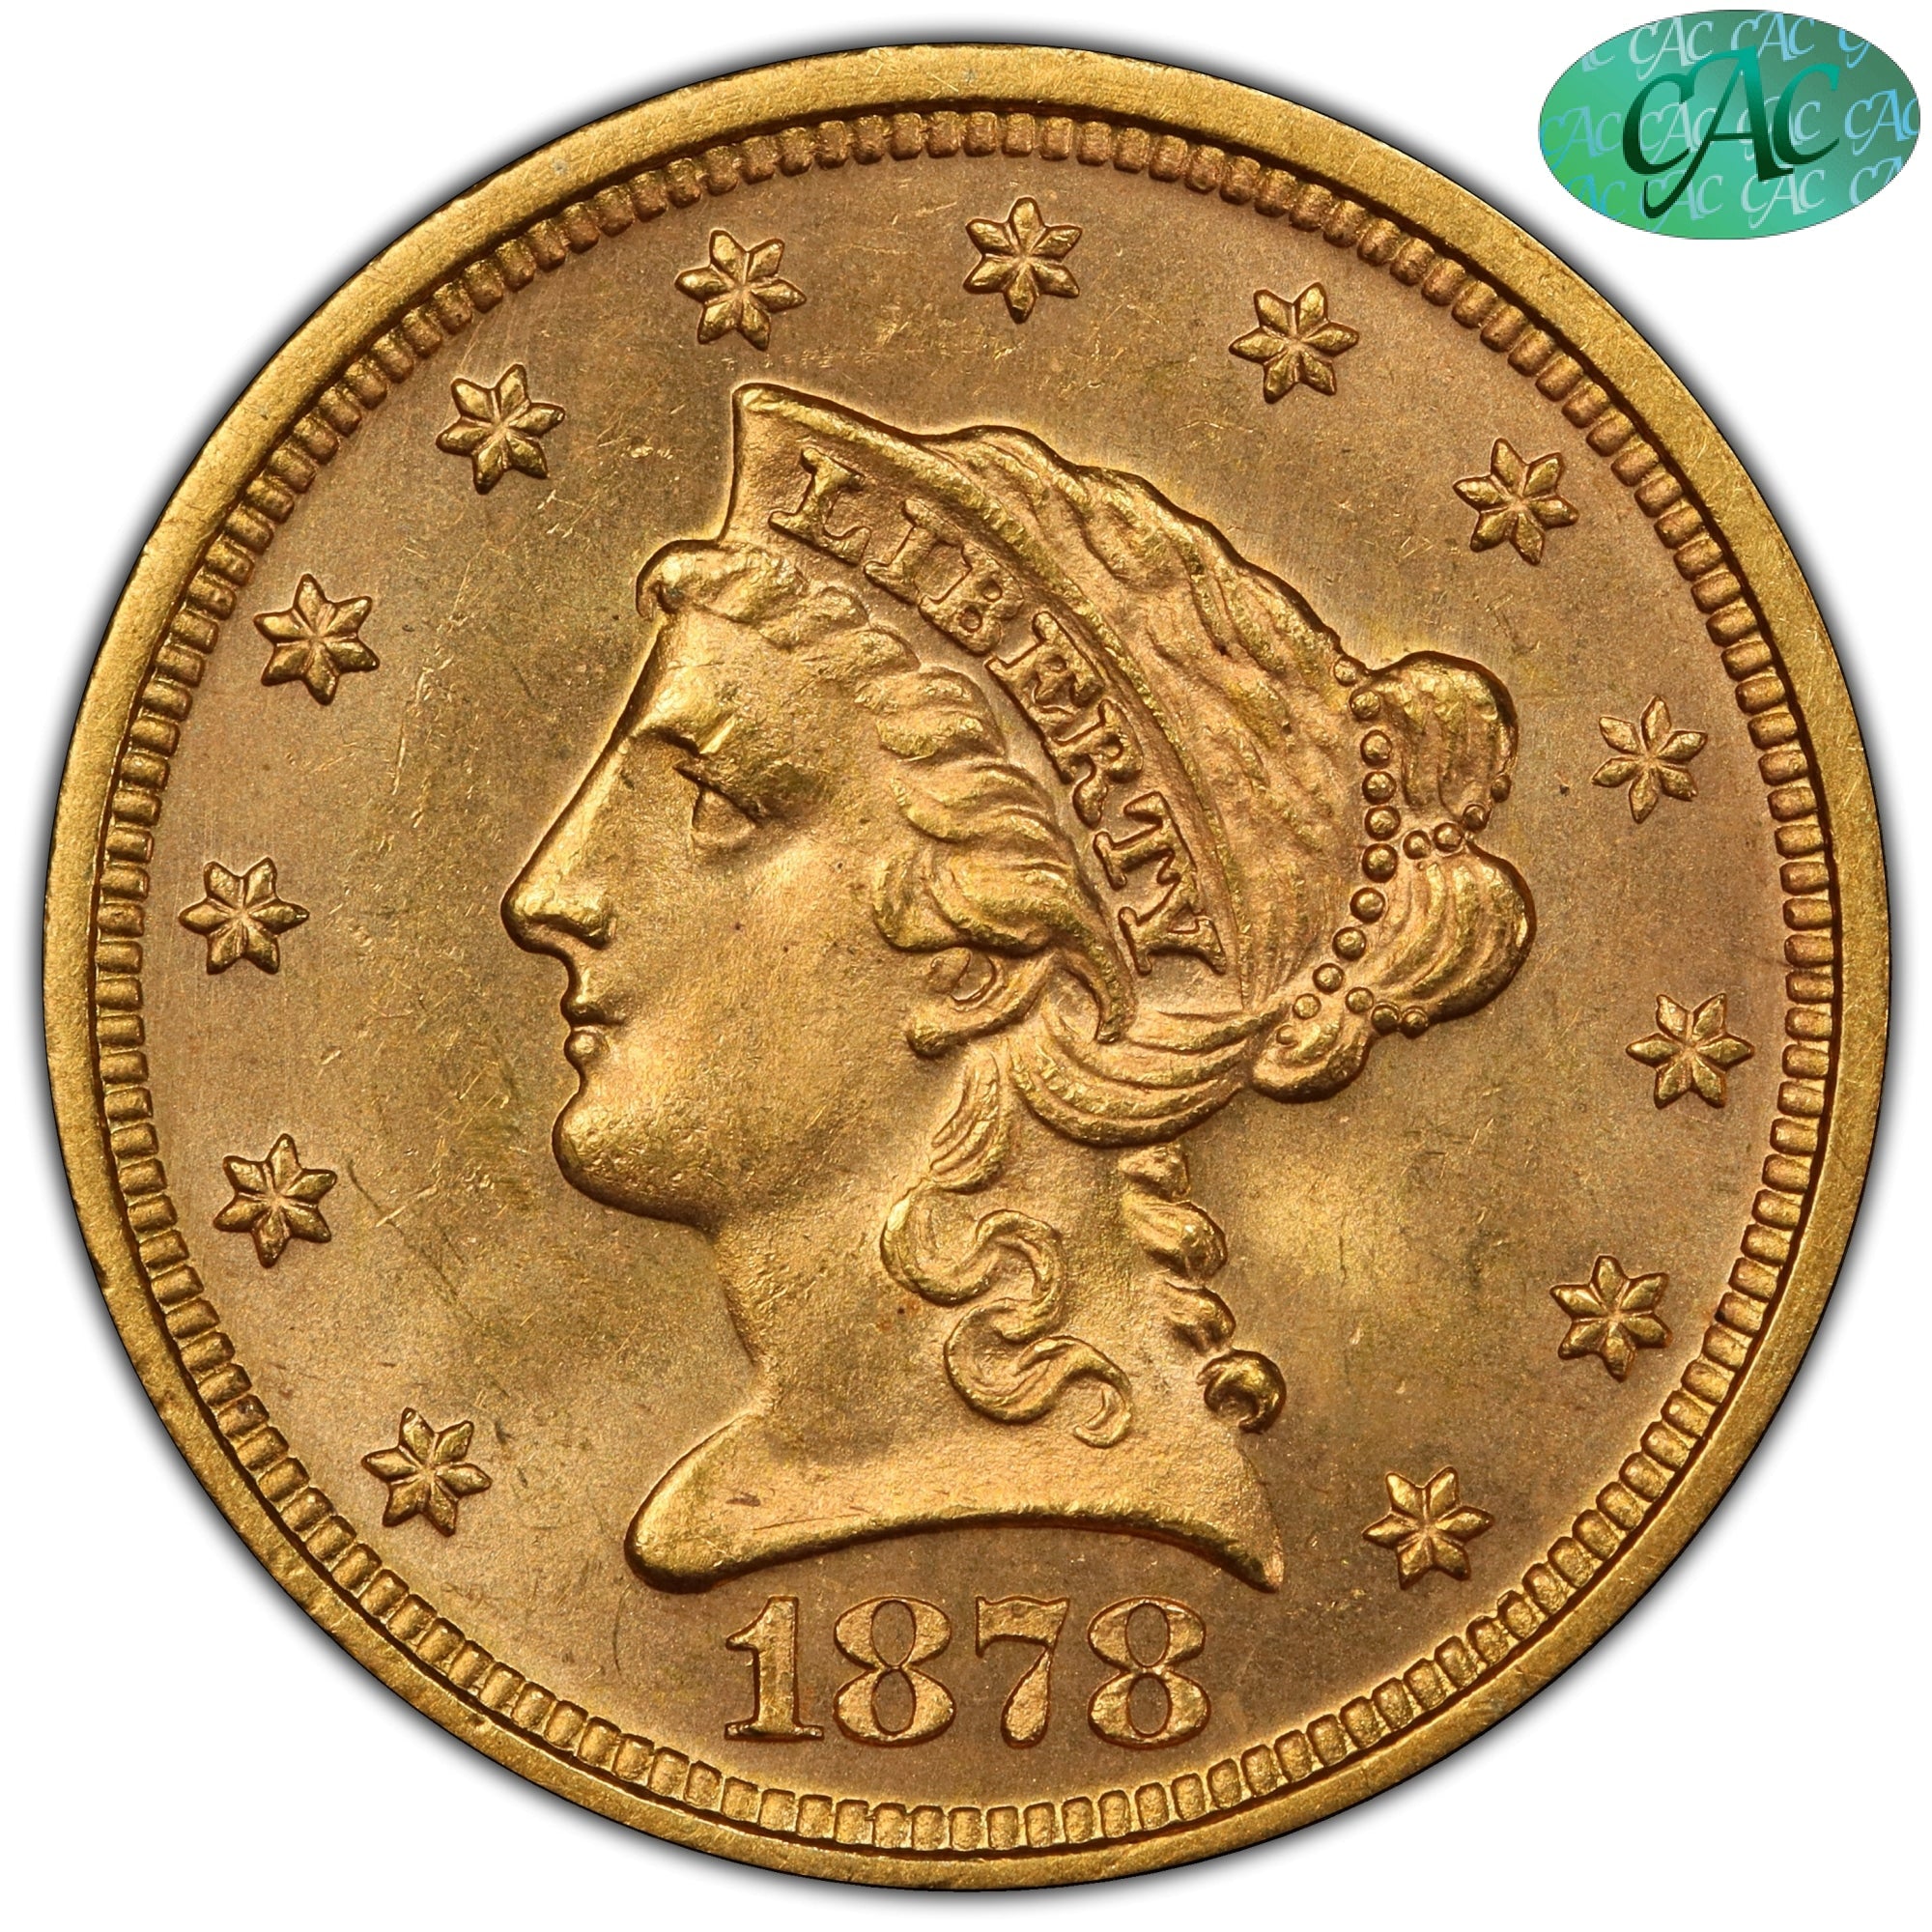 1878-S $2.5 MS65 PCGS CAC - Paradime Coins US Coins For Sale